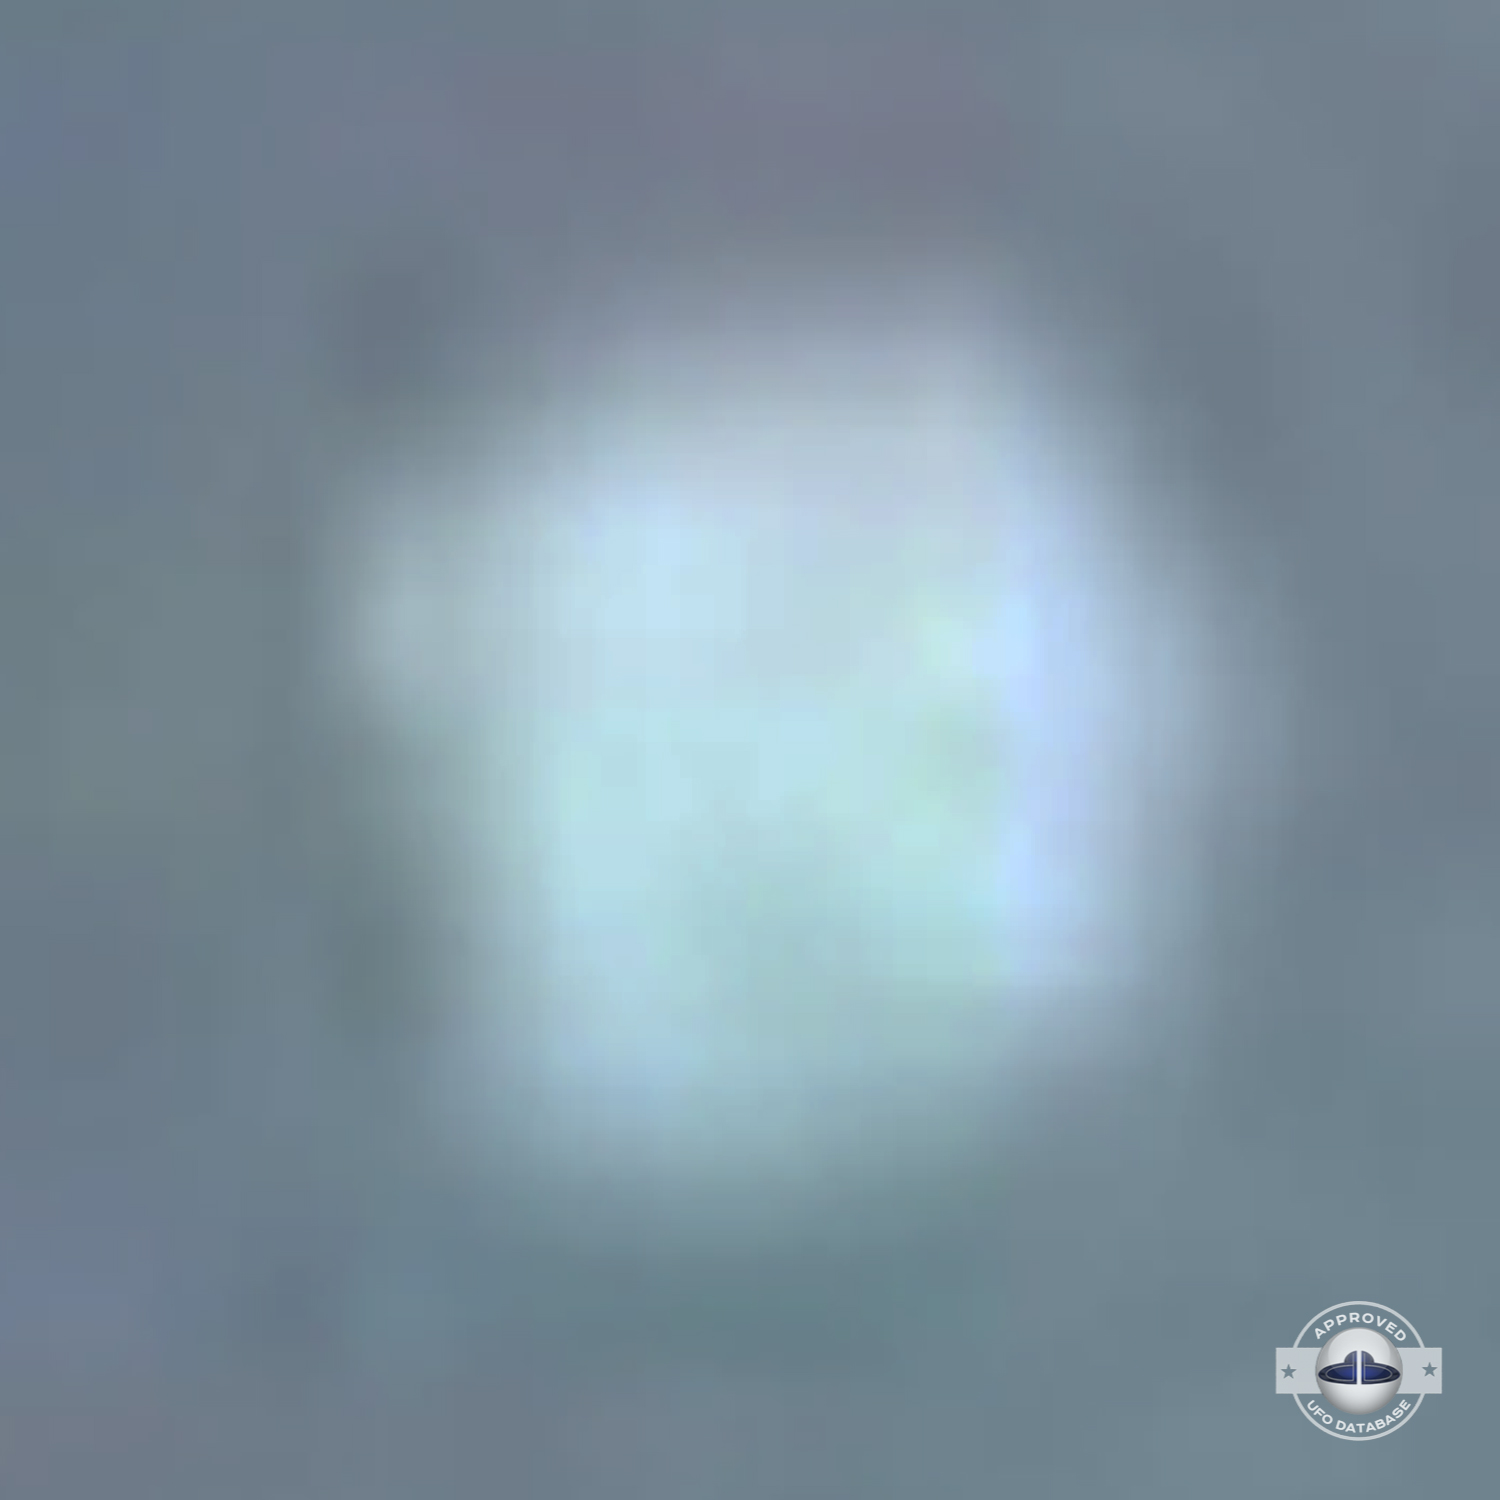 UFO passing over unknown body of water somewhere in Turkey | May 2003 UFO Picture #173-7